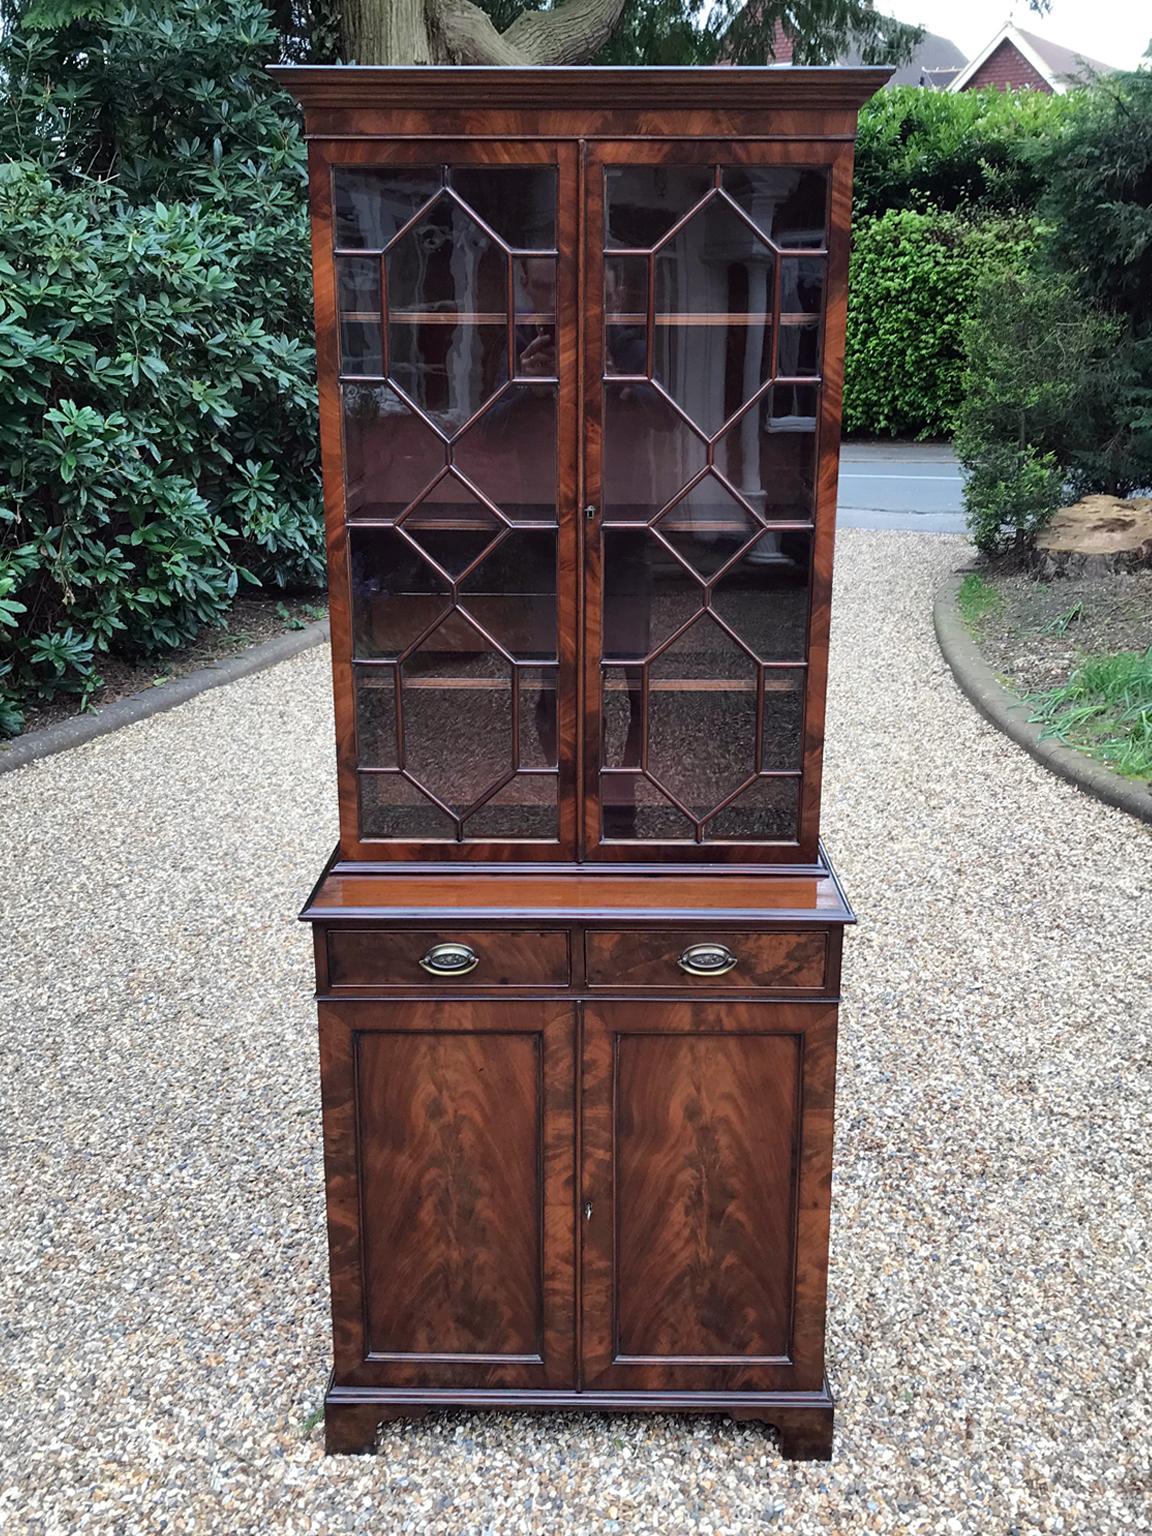 A late Victorian mahogany bookcase or cupboard with two mahogany lined drawers and brass oval handles. Three adjustable shelves to the top bookcase section. The cupboard below has one shelf which can be adjusted. Comes apart in two separate sections